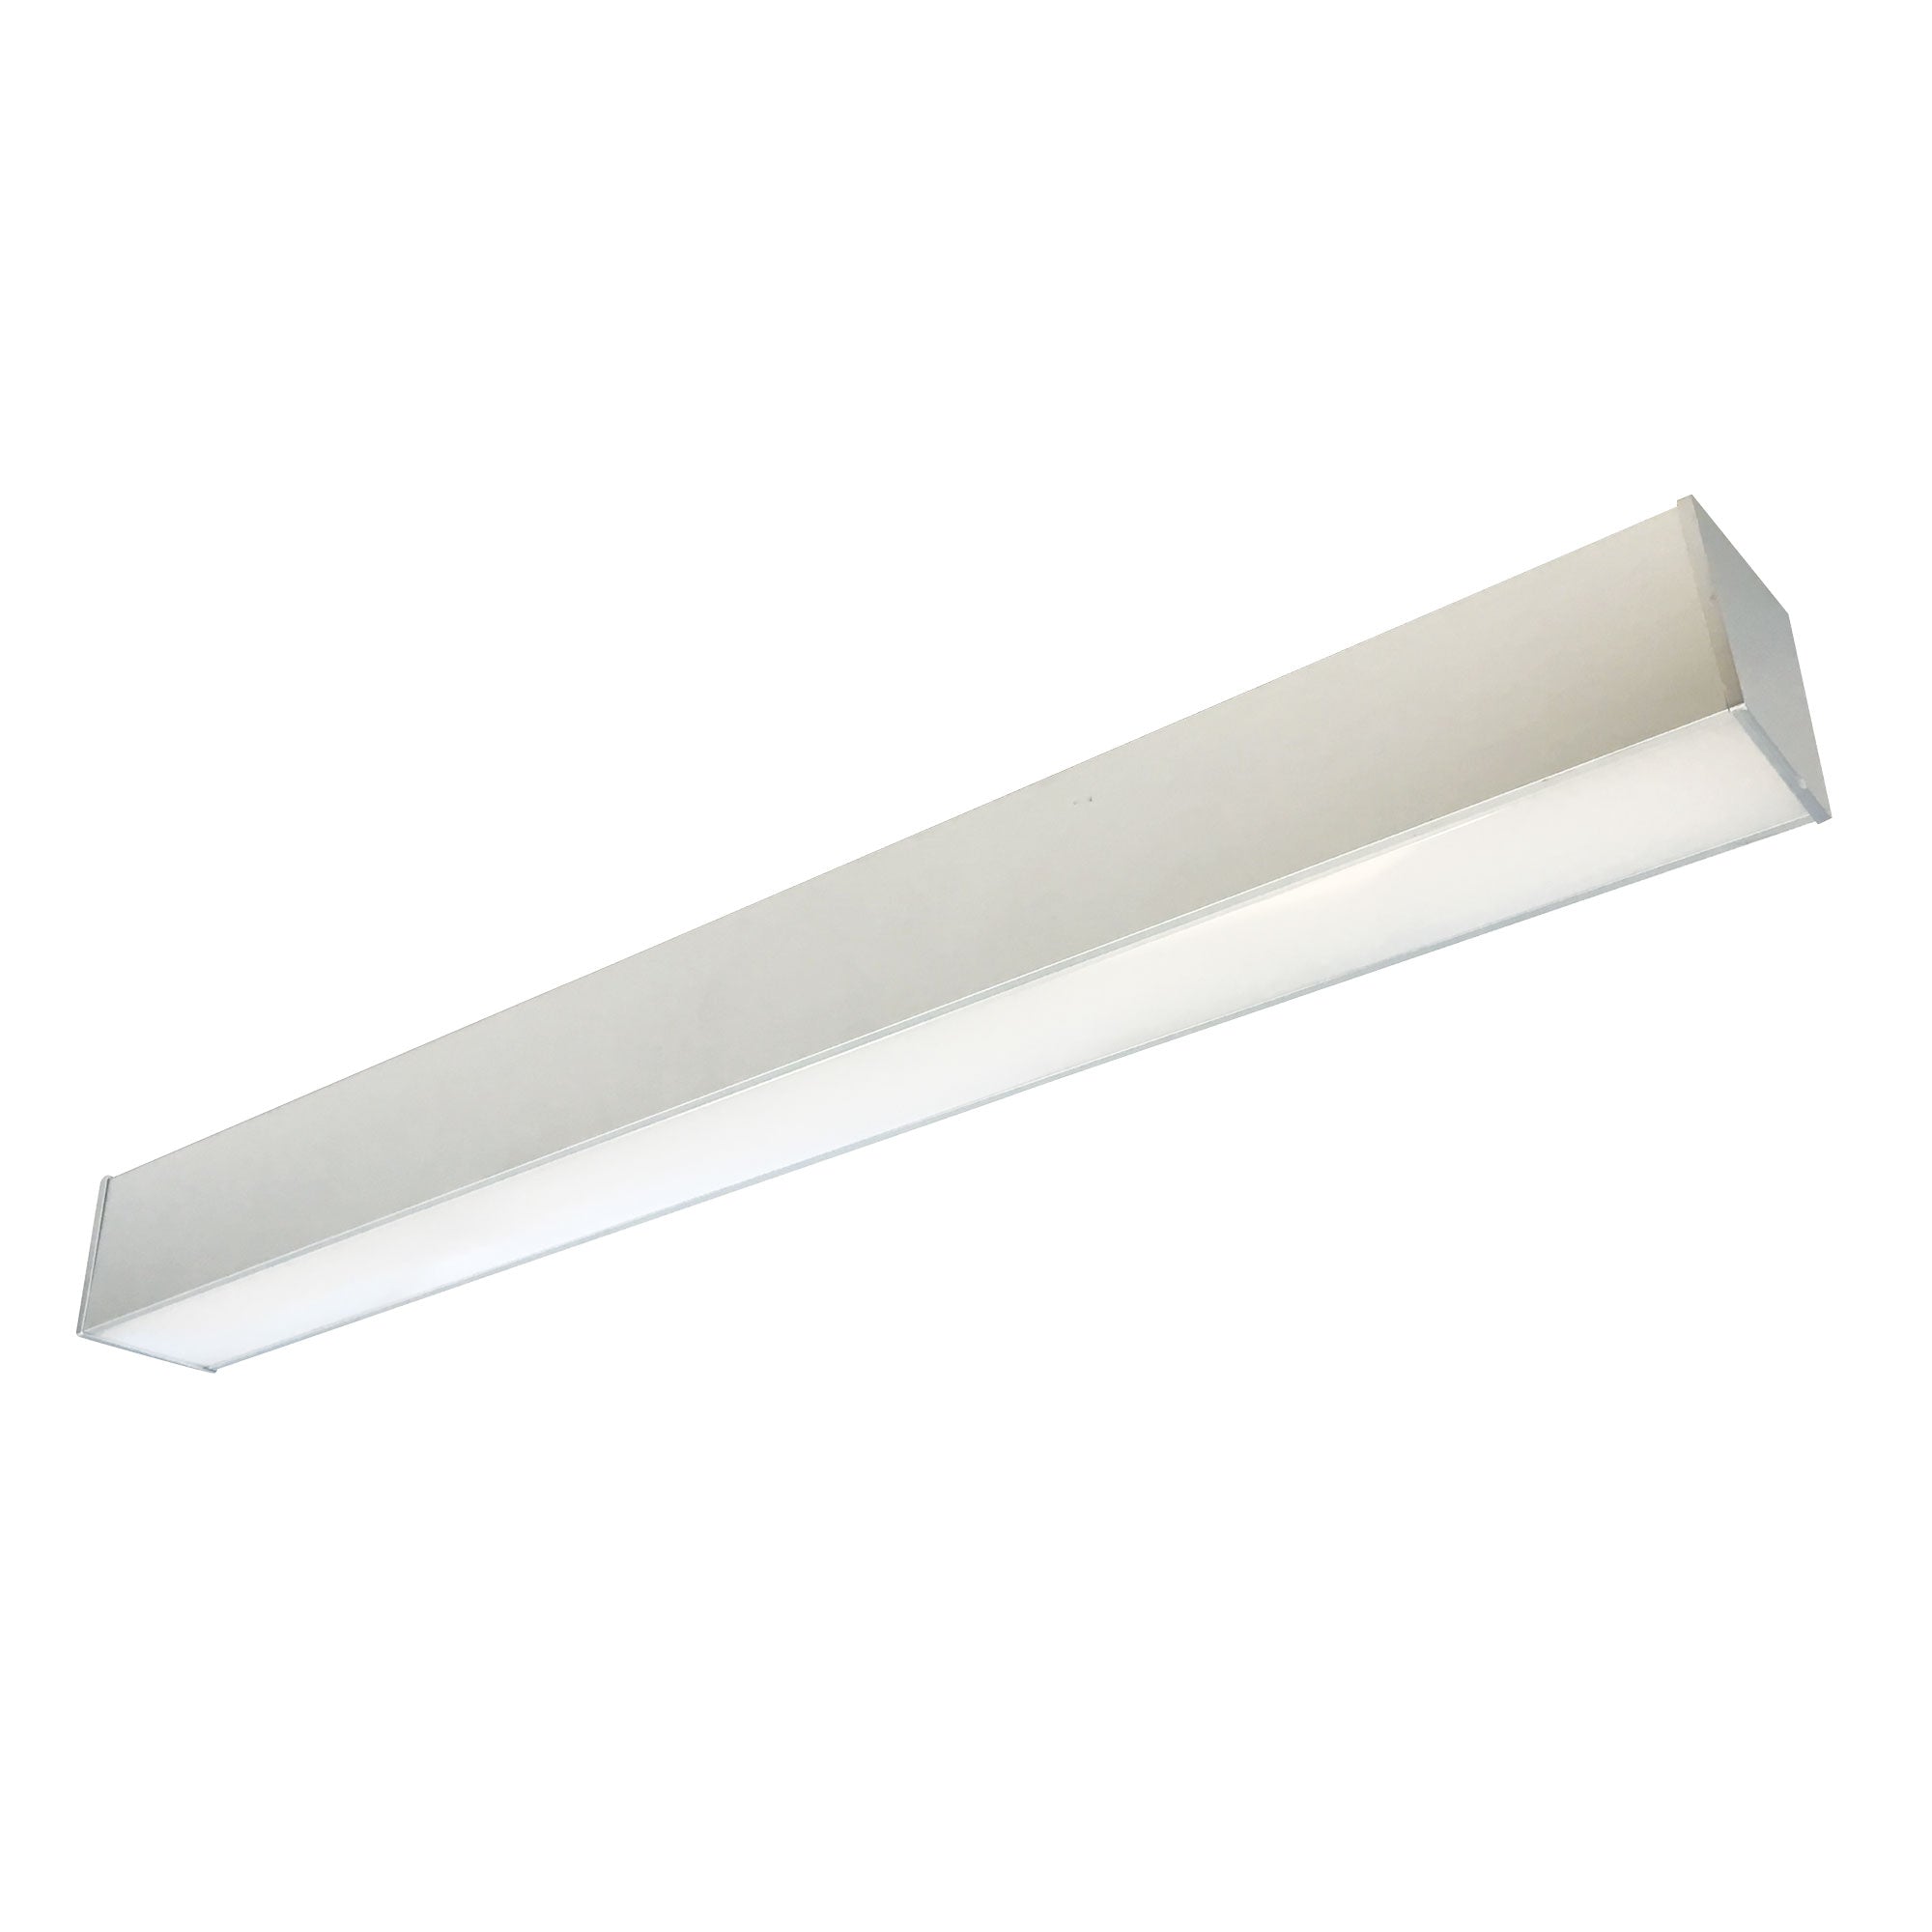 Nora Lighting NLIN-81030A/A - Linear - 8' L-Line LED Direct Linear w/ Dedicated CCT, 8400lm / 3000K, Aluminum Finish